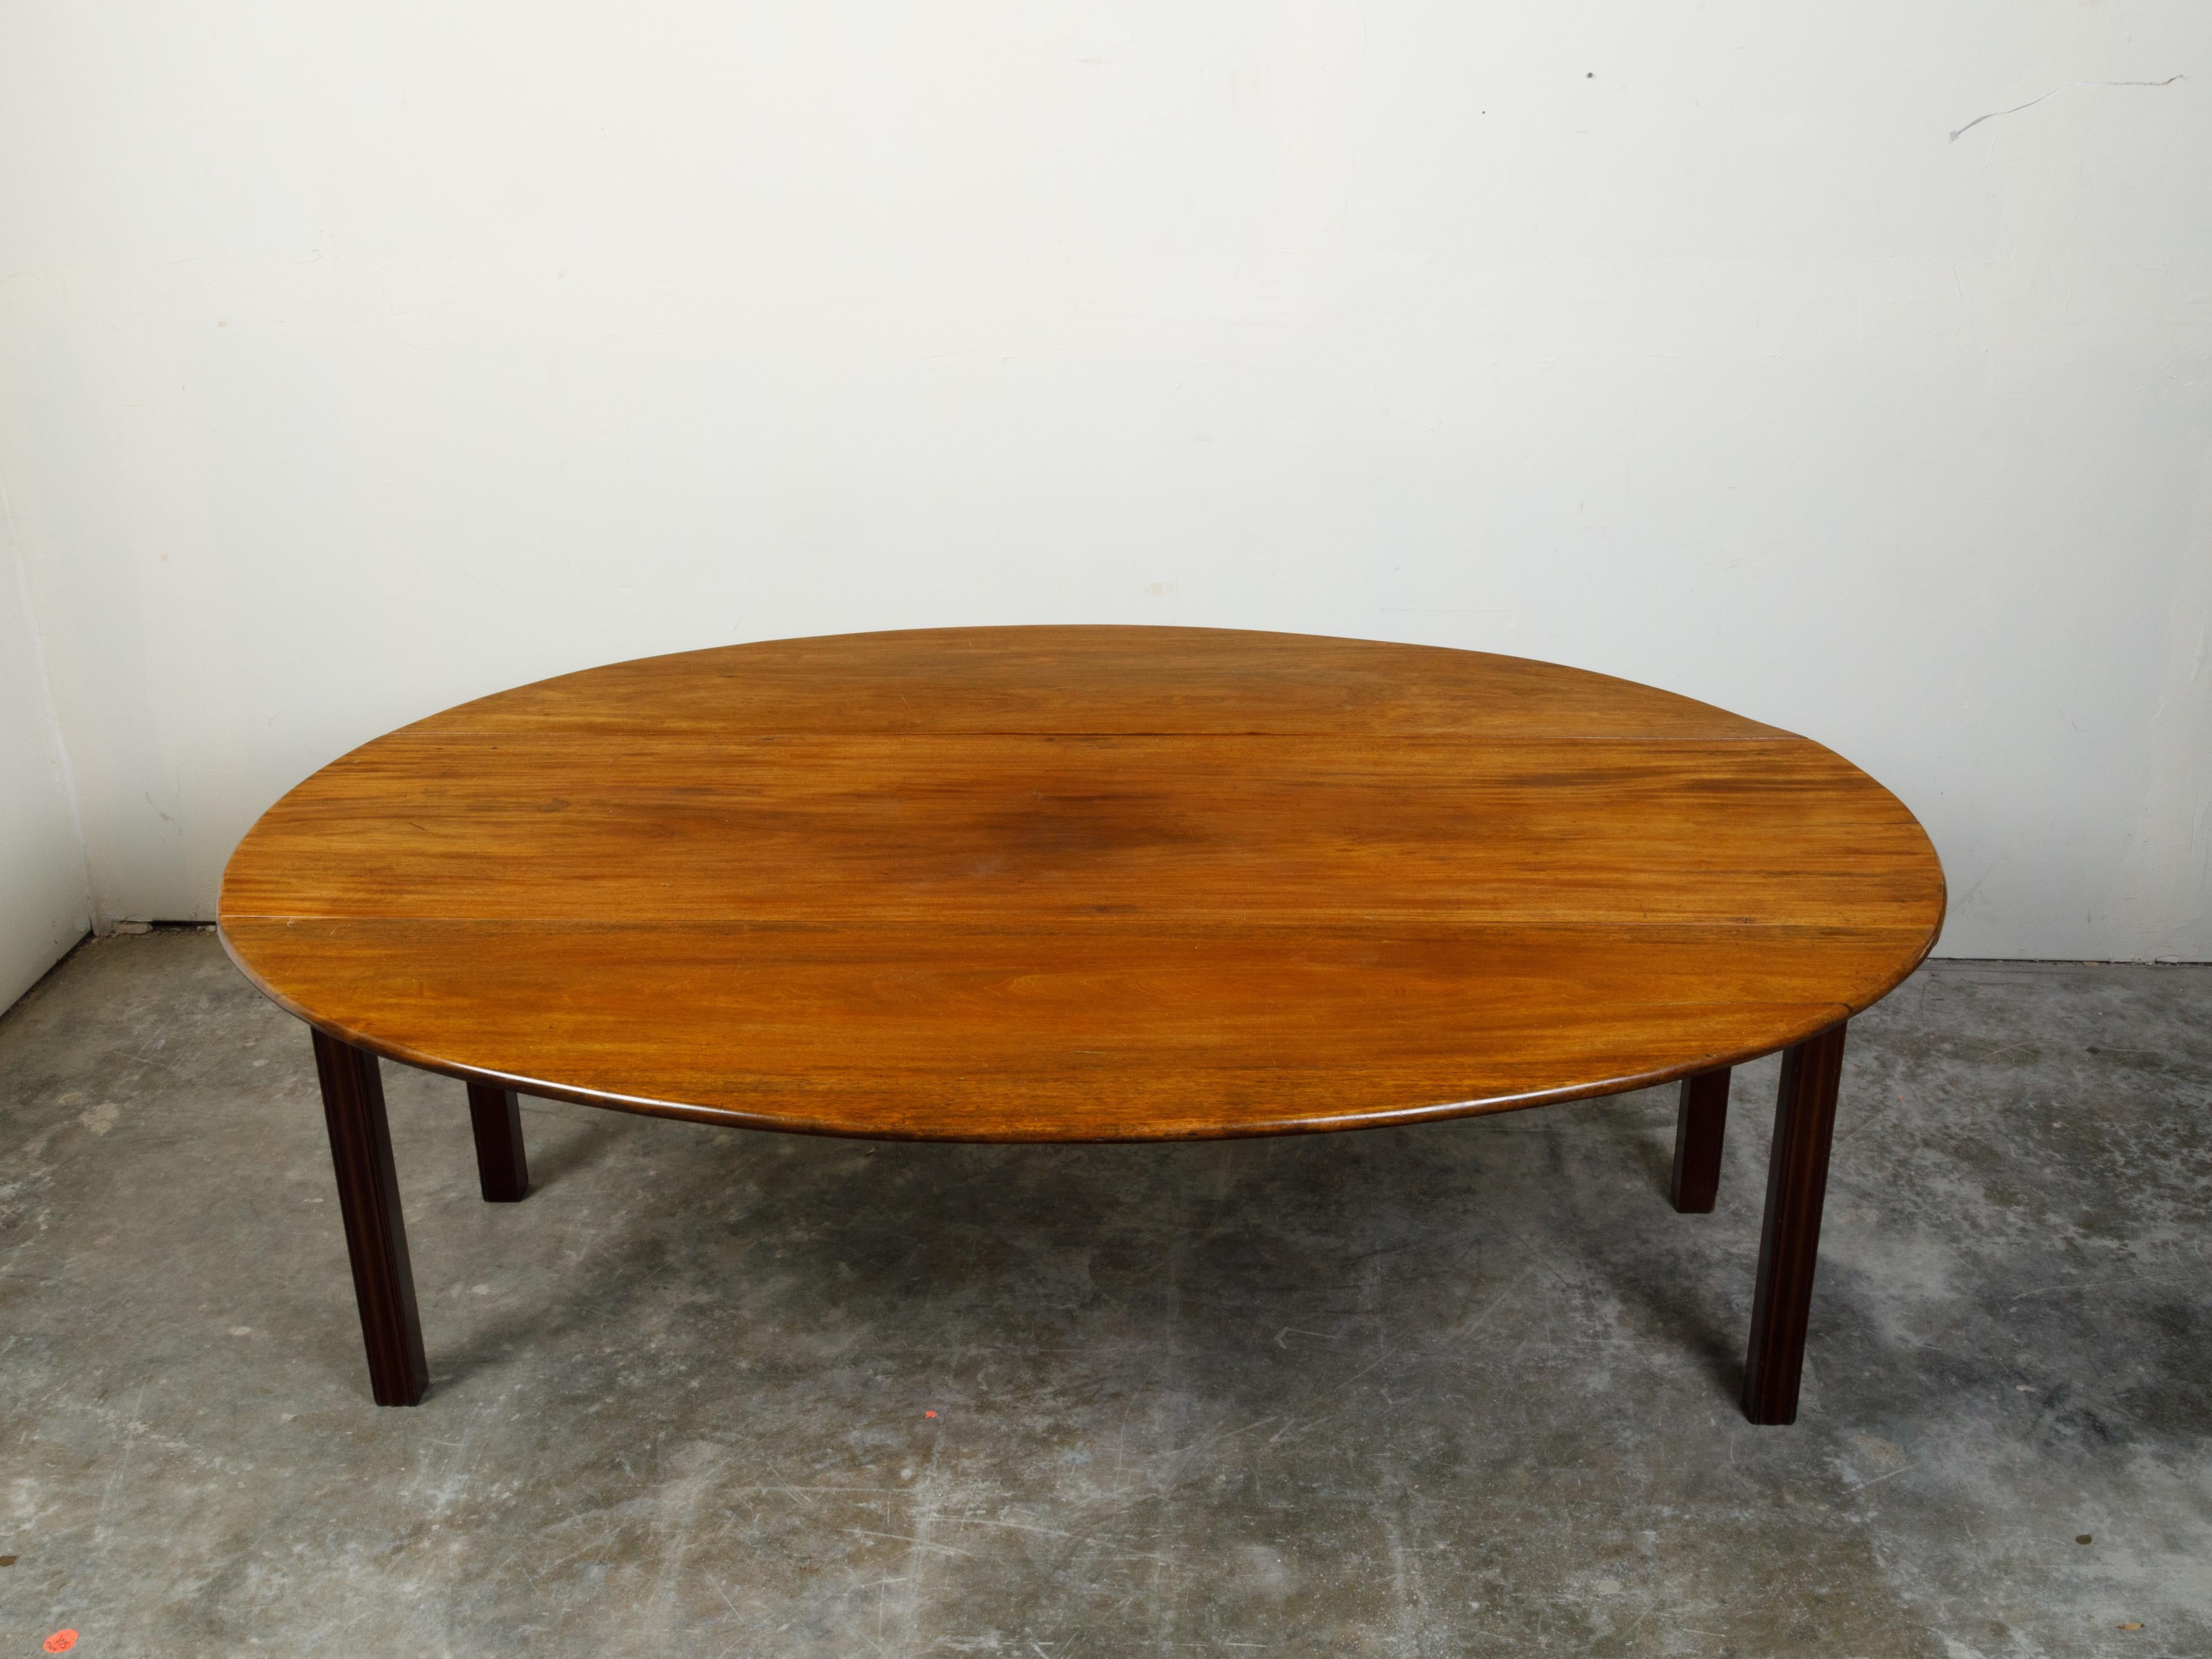 19th Century English Walnut Drop-Leaf Table with Oval Top and Straight Legs For Sale 3